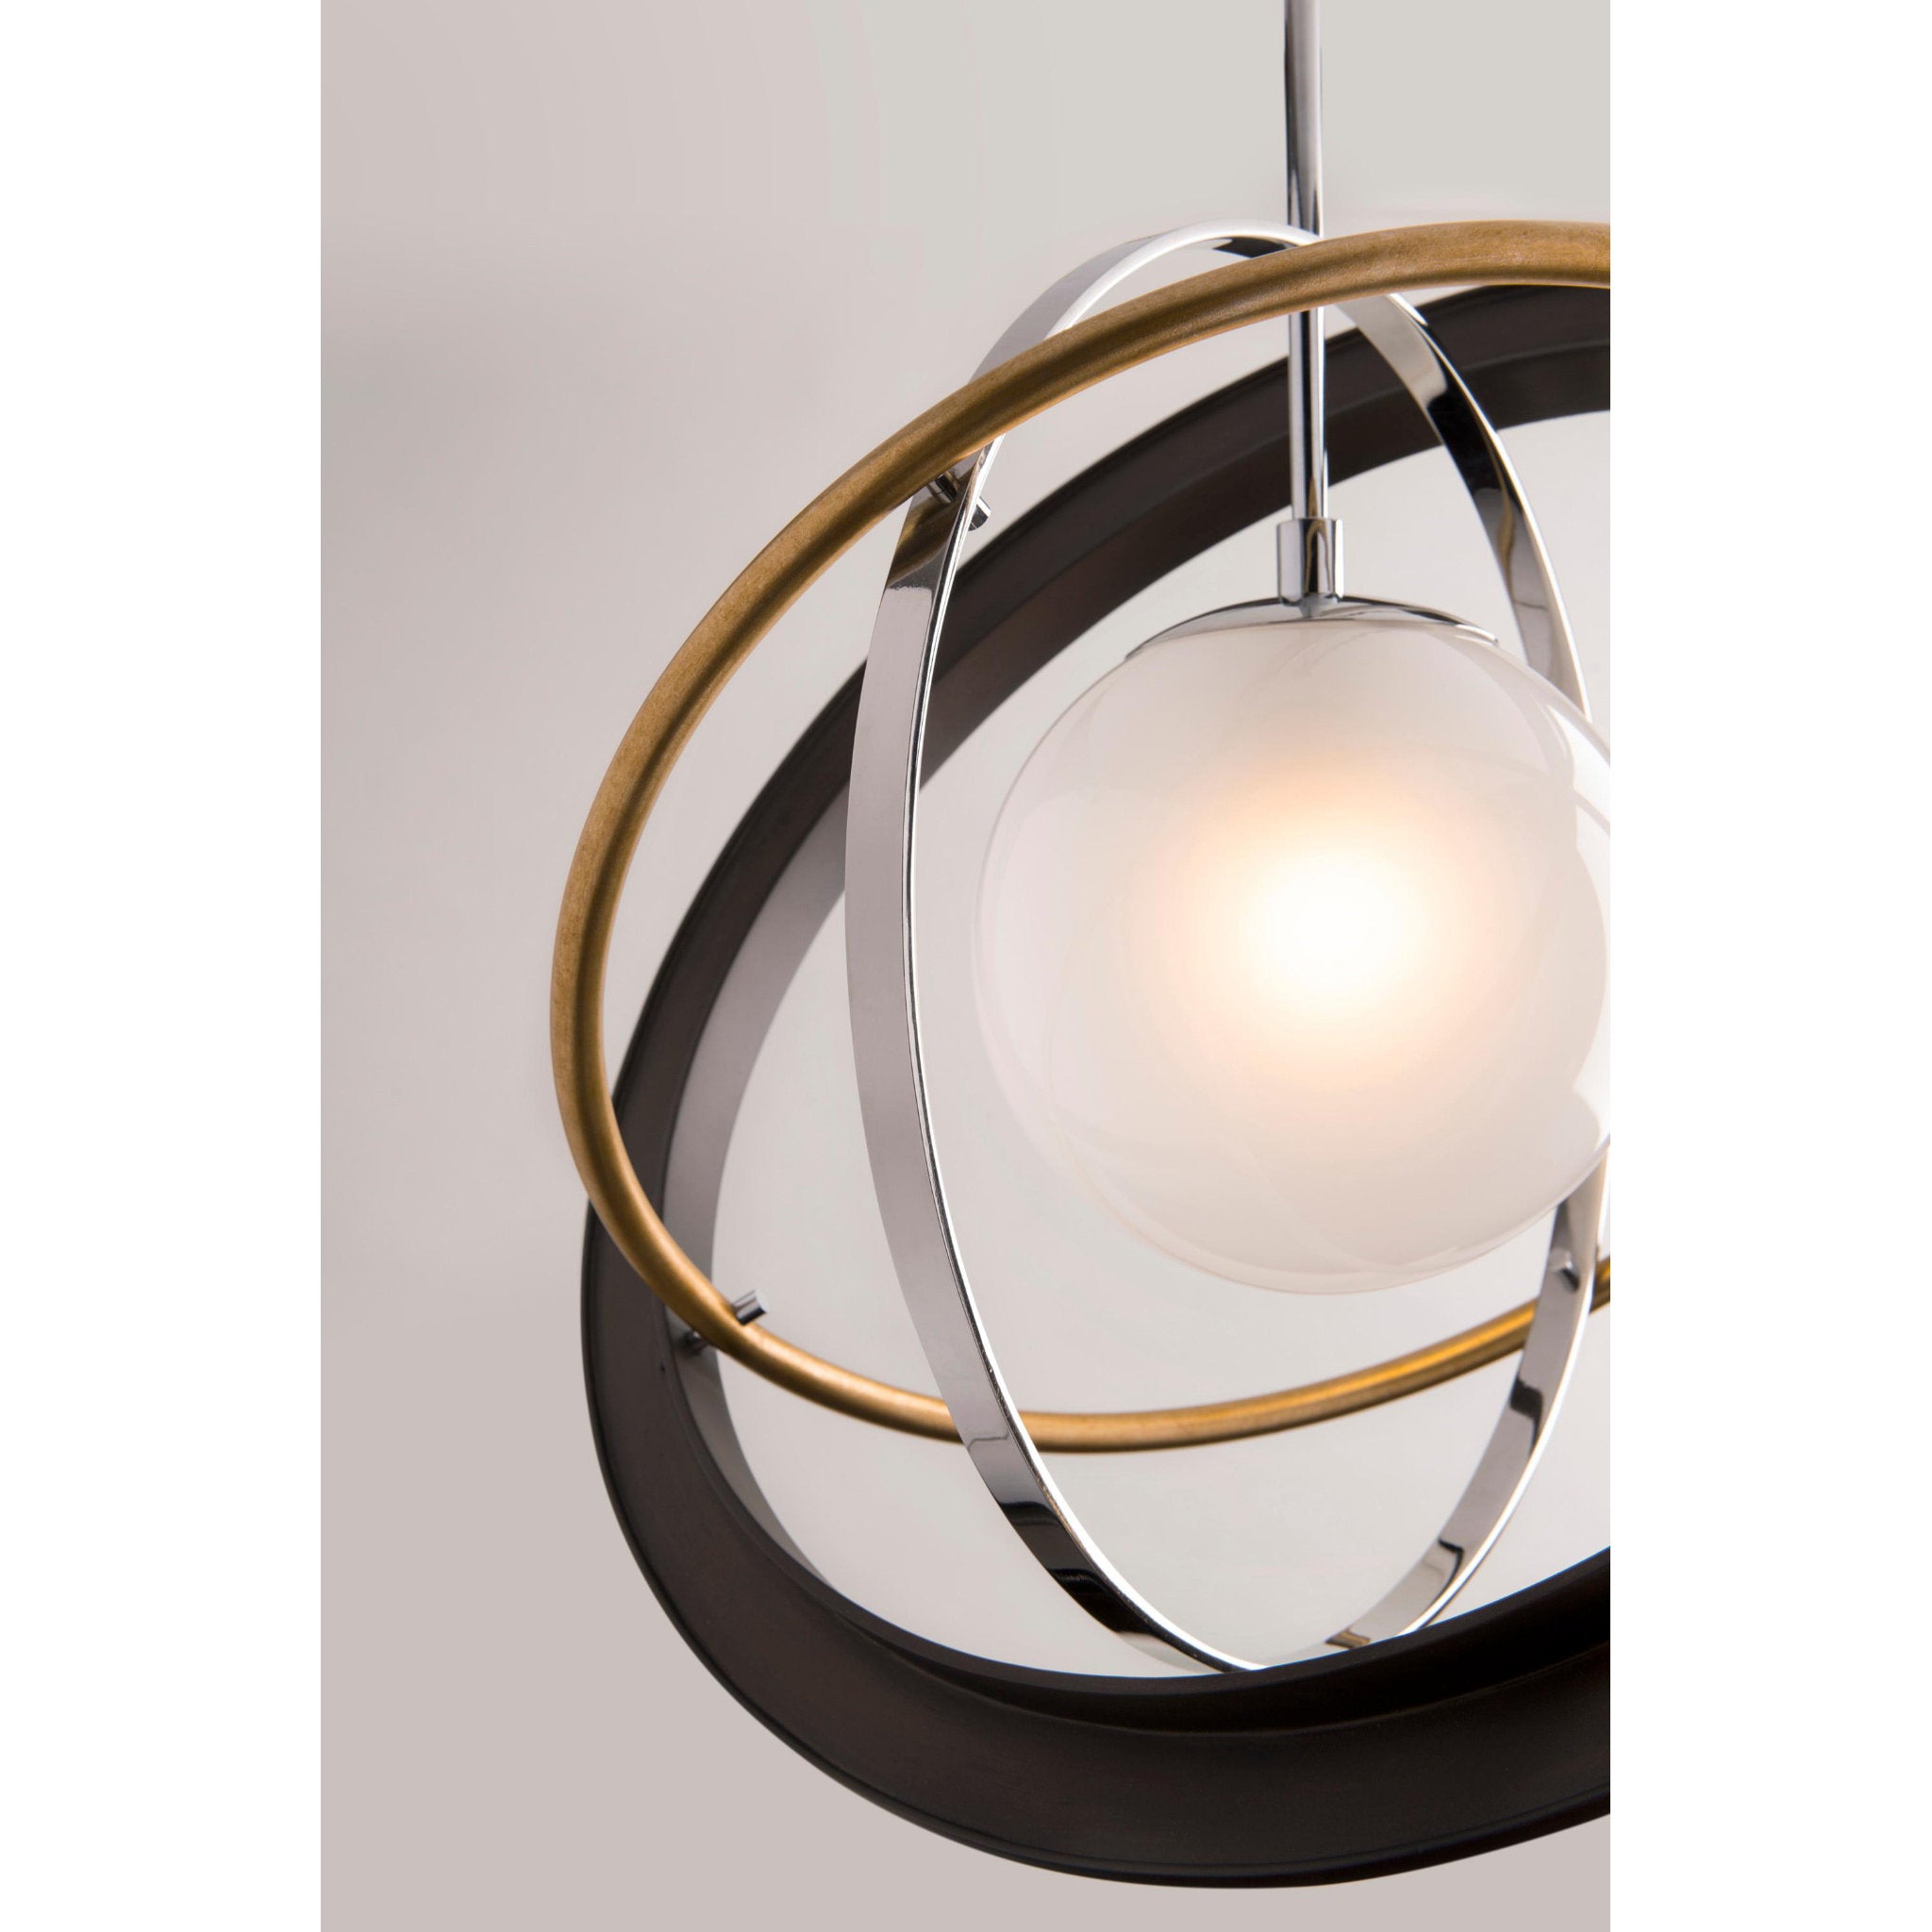 Apogee 1 Light Chandelier in Bronze Gold Leaf And Stainless